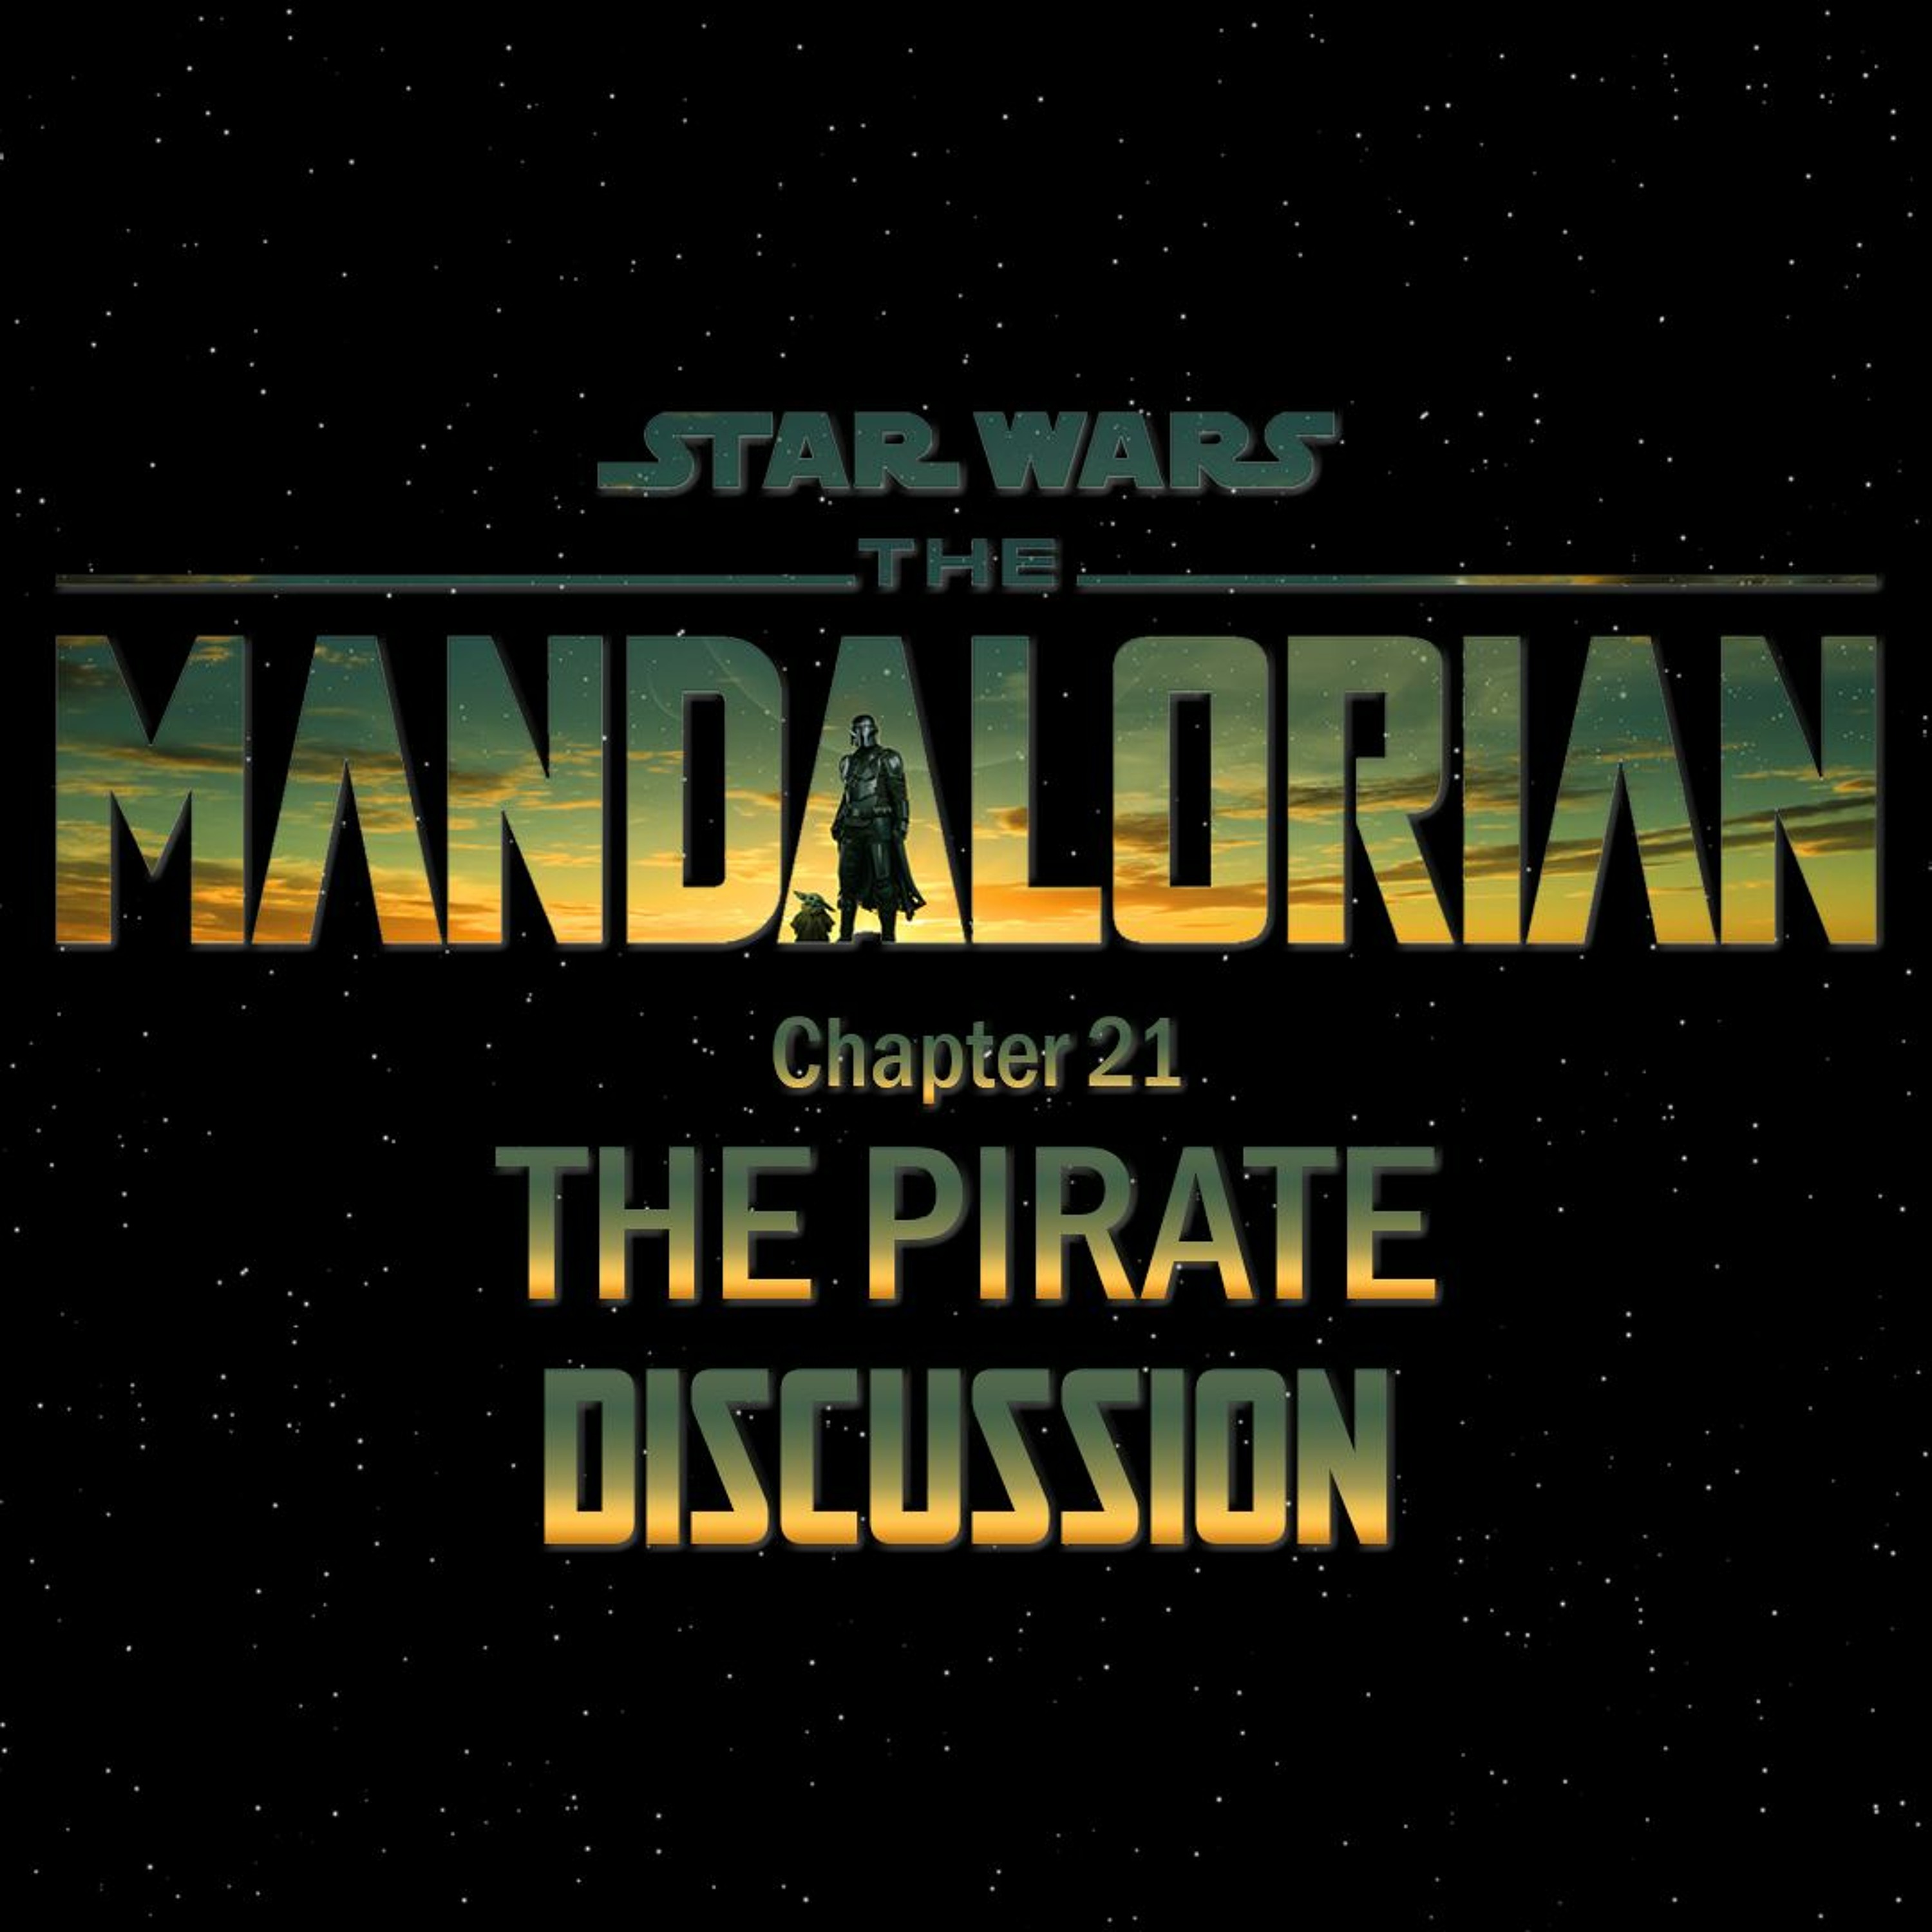 The Mandalorian Chapter 21: The Pirate